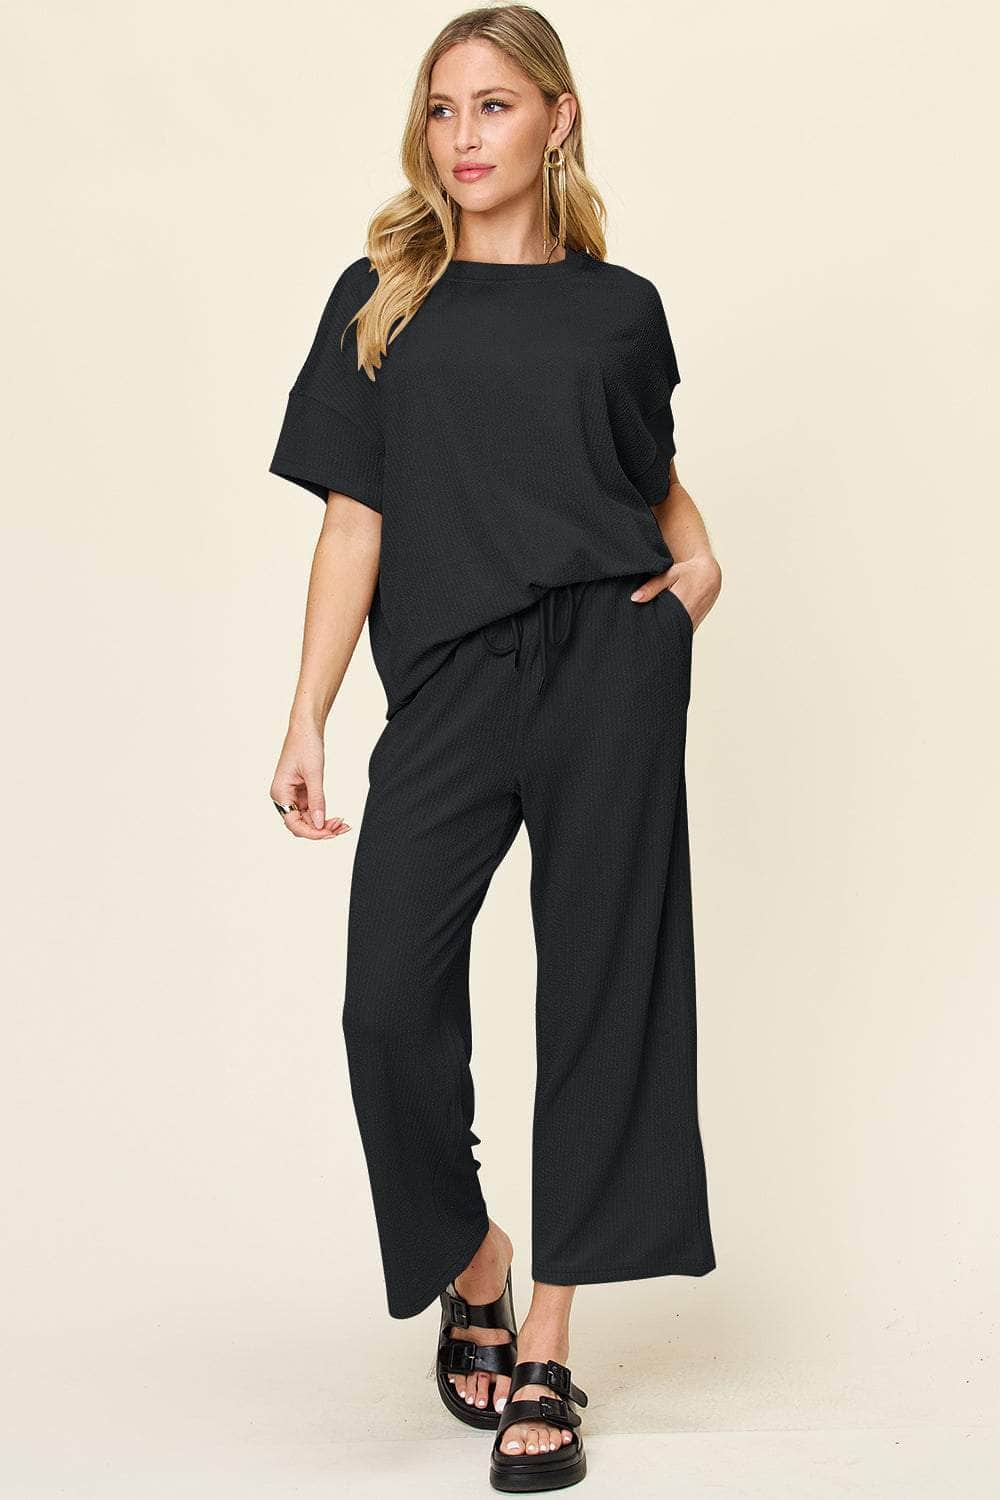 Double Take Full Size Texture Round Neck Short Sleeve T-Shirt and Wide Leg Pants Black / S